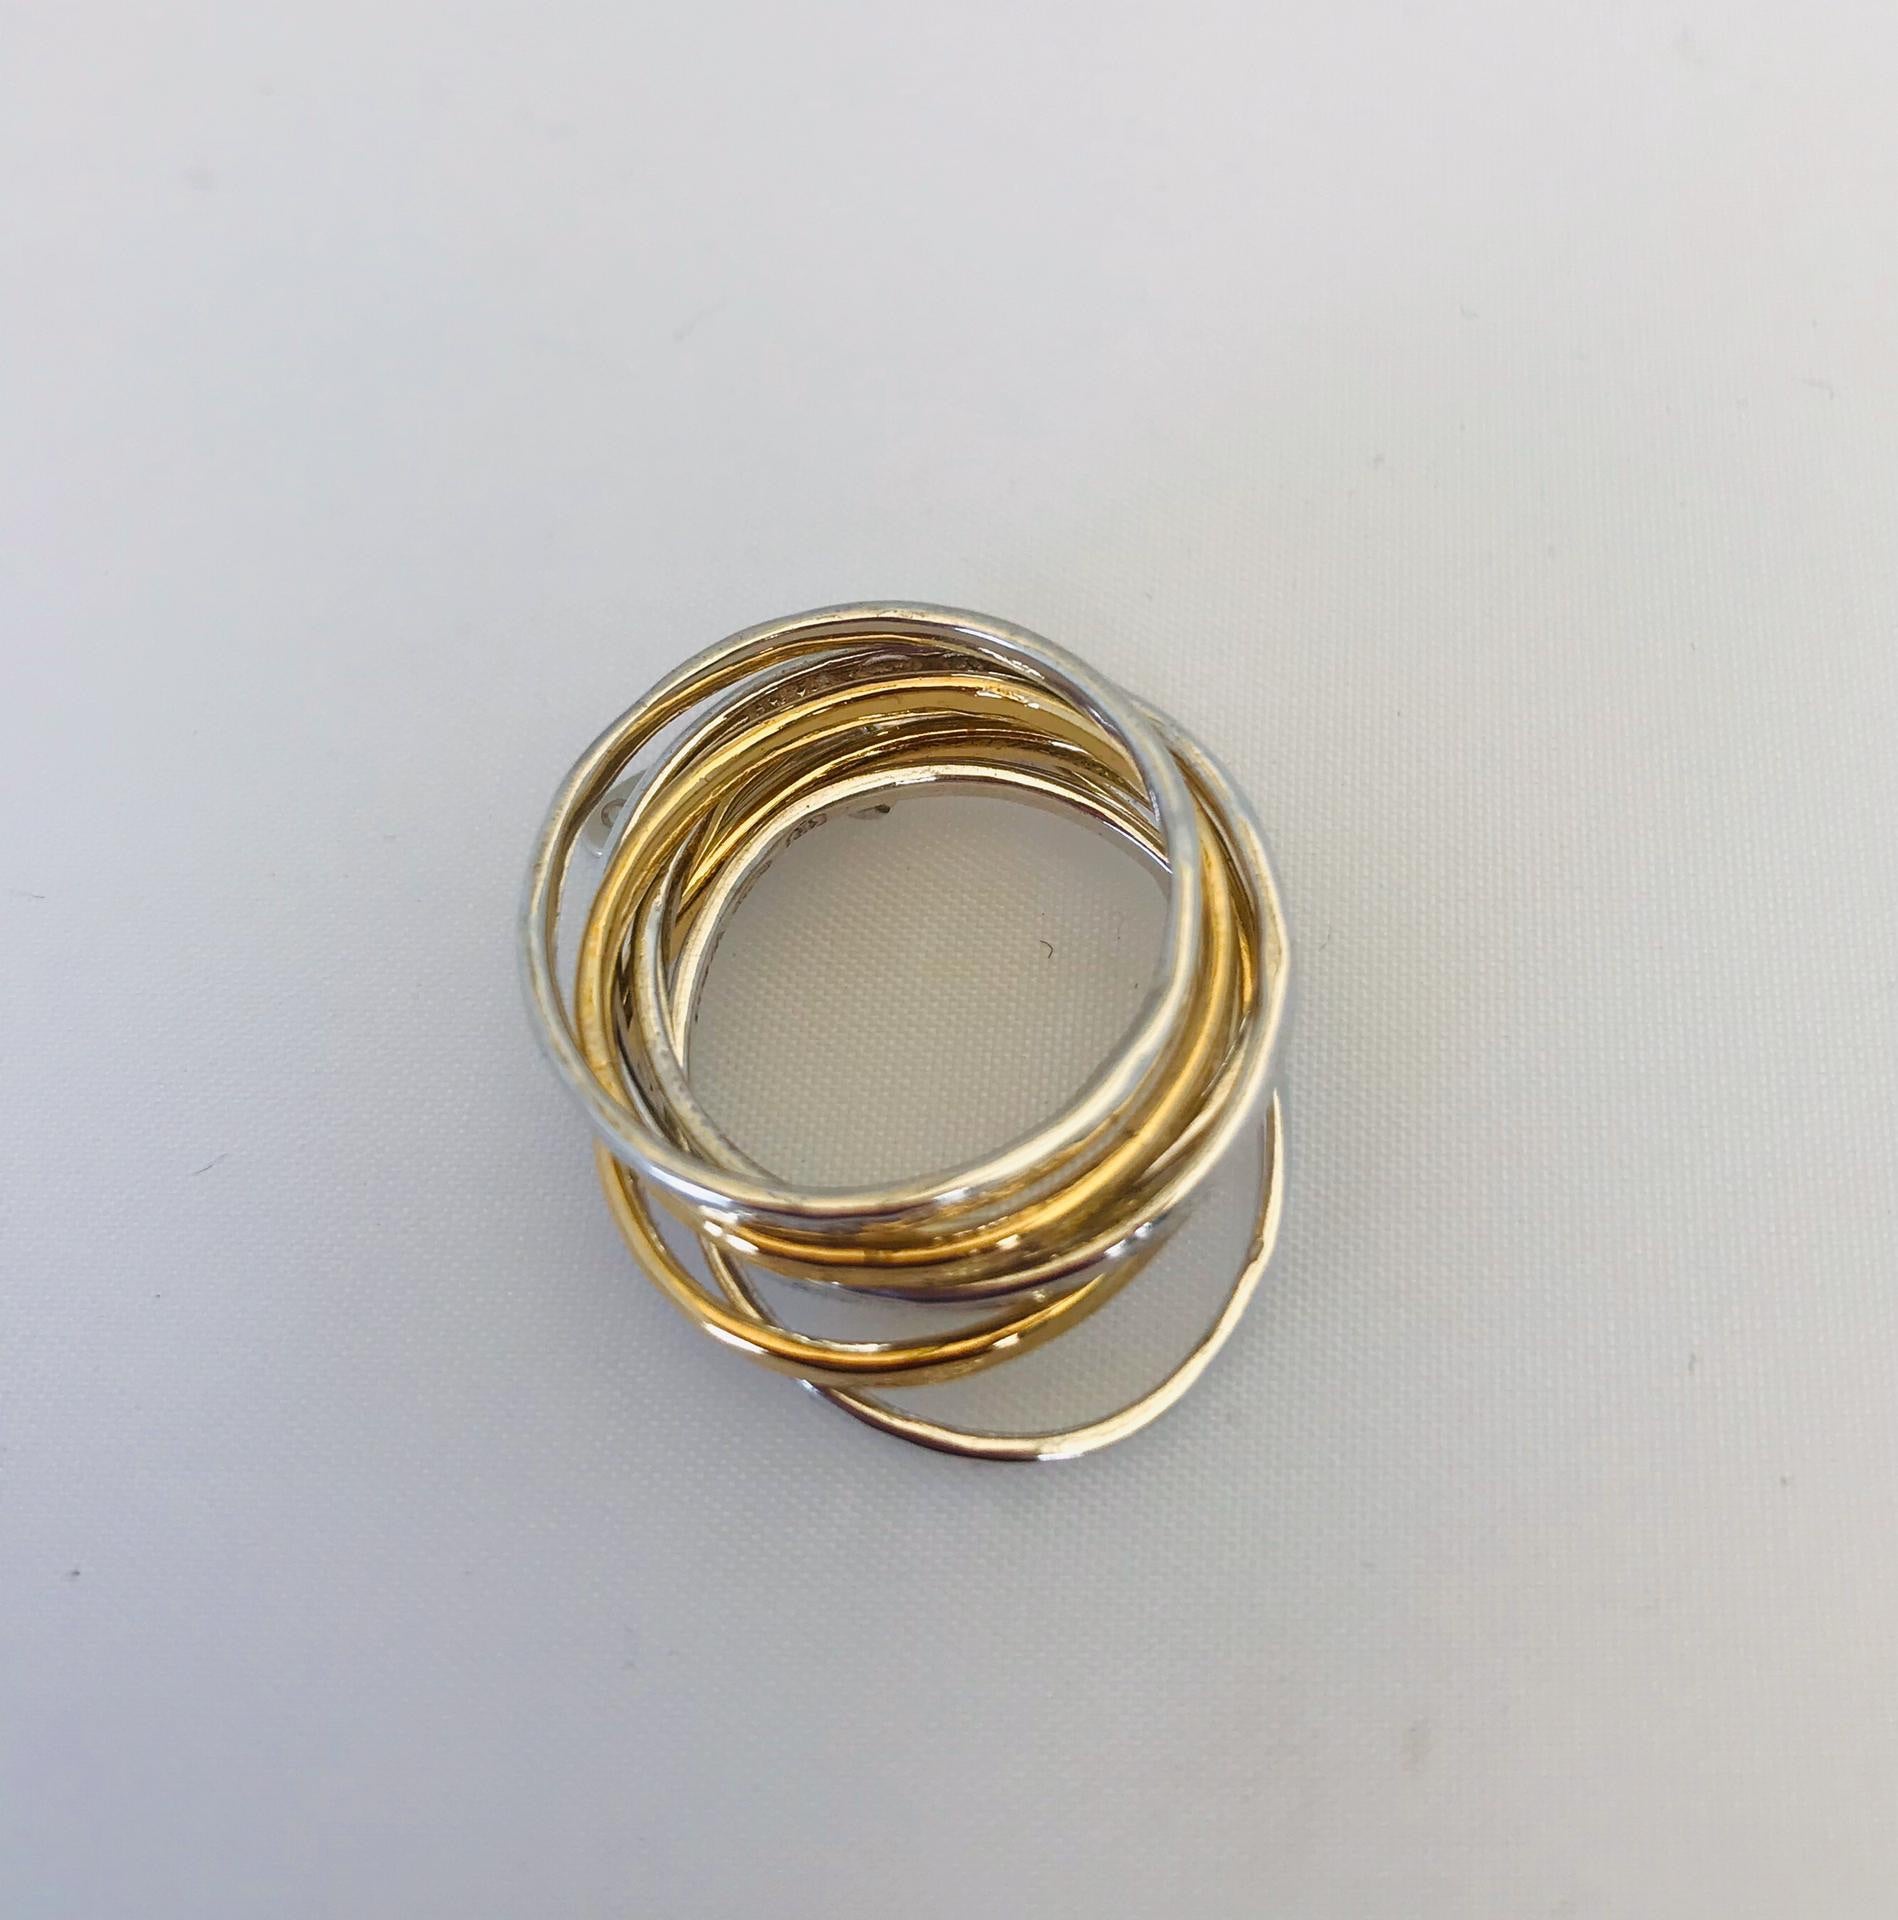  this 7 mix ring by Wouters & Hendrix. The ring include 7 separate rings of which 5 are silver and 2 gold plated. 2 of the silver rings and 1 gold plated ring have an oval shape. 